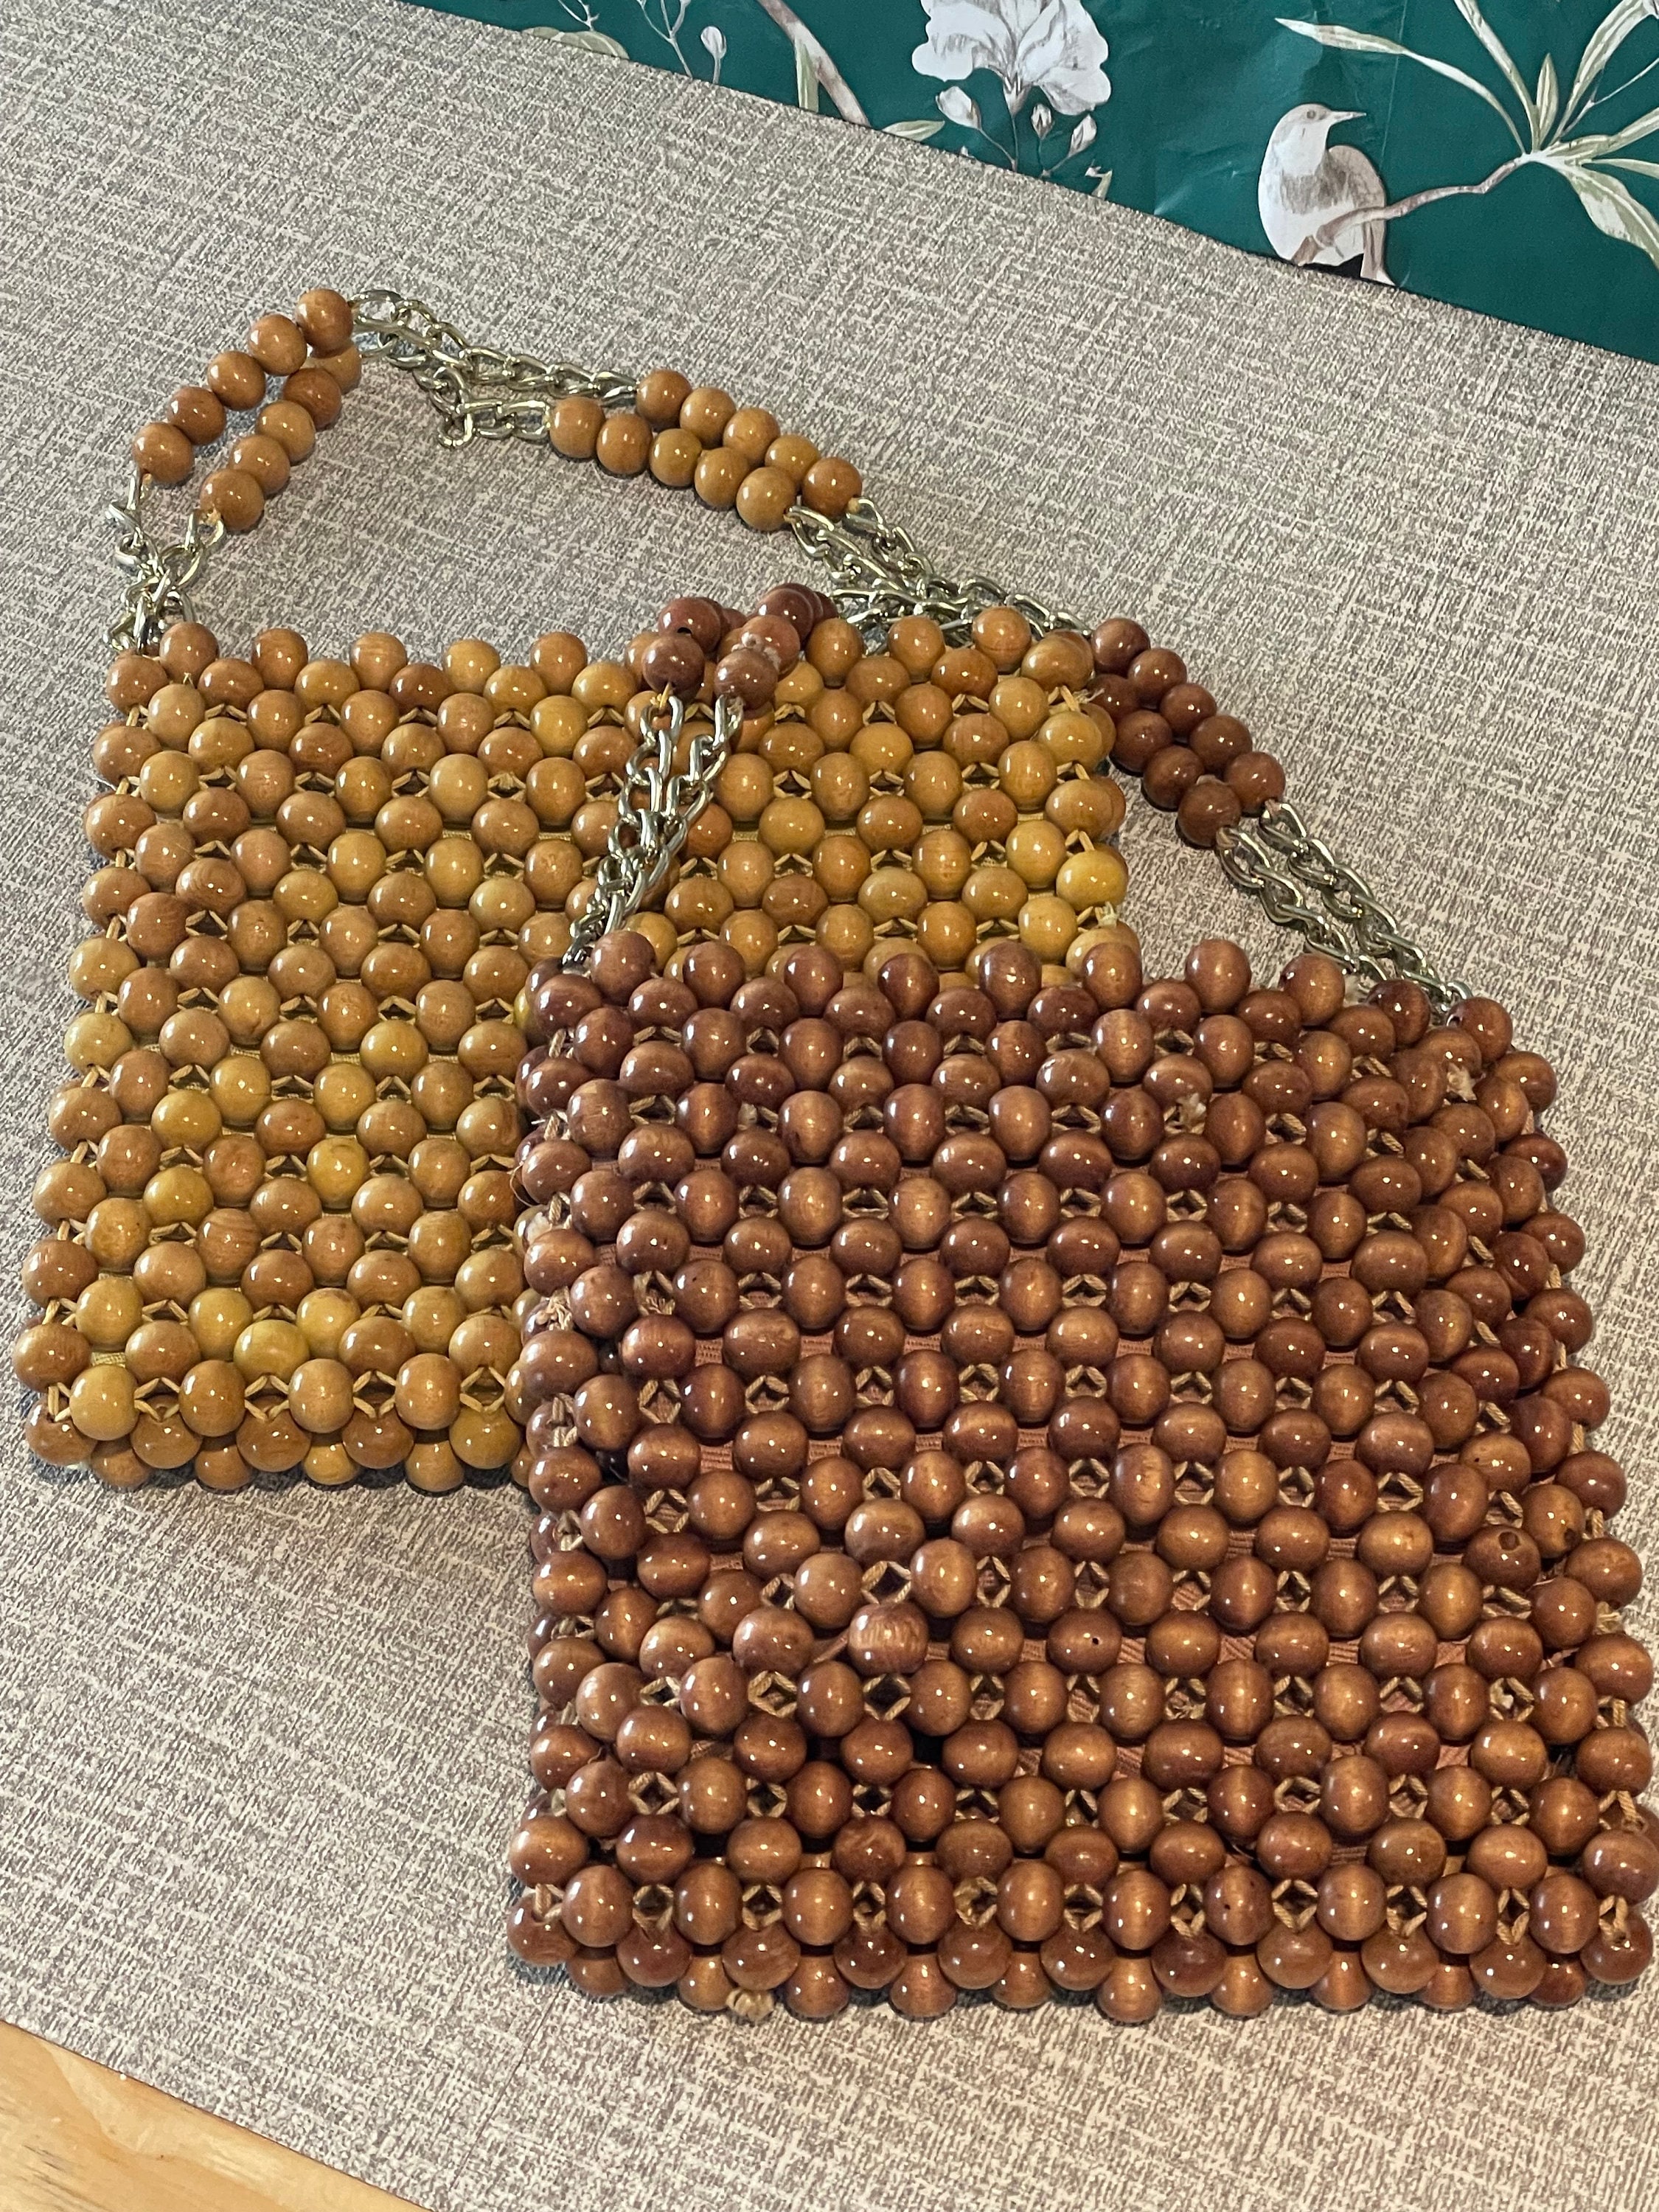 1960s Wooden Bead Shoulder Bag Purse Gold Tone Chain and Bead Strap - -  Ruby Lane